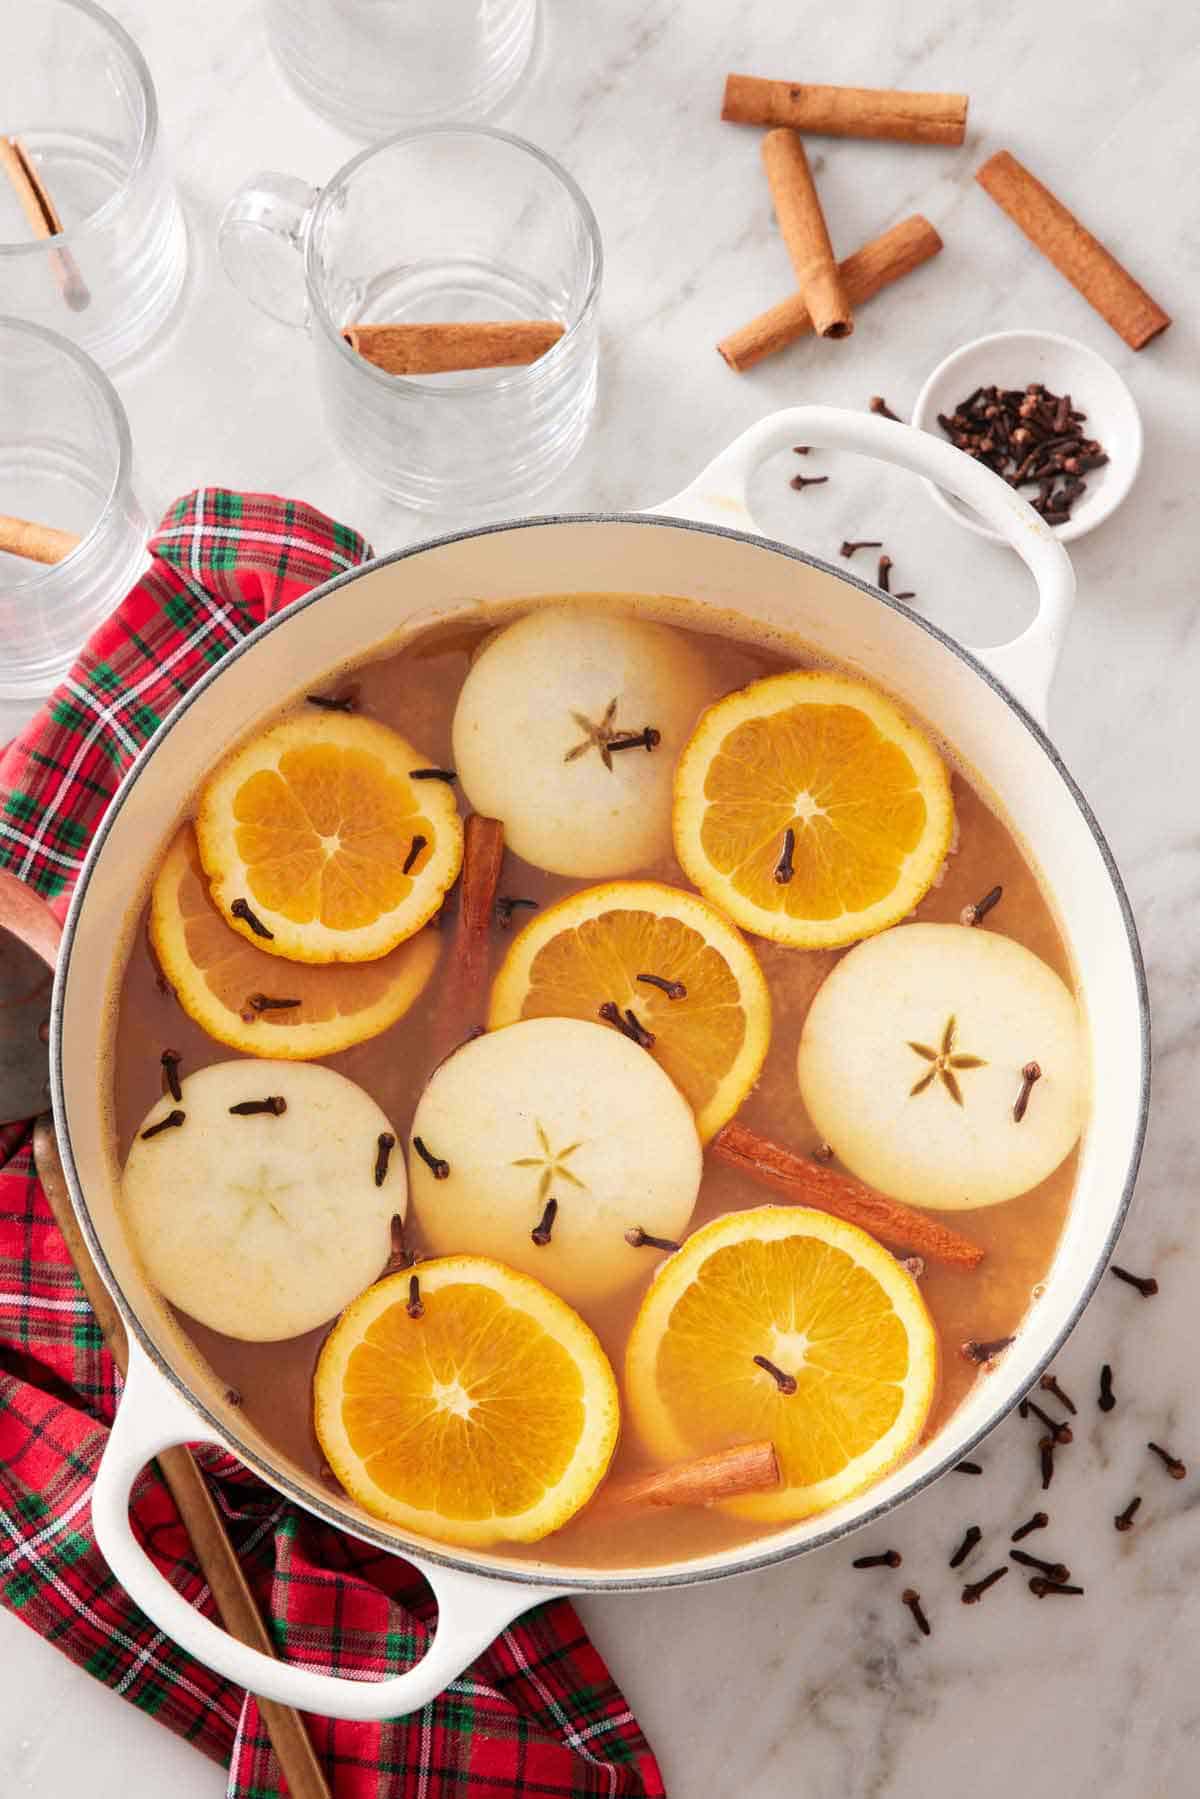 Overhead view of a white dutch oven of wassail topped with sliced orange, apples, cloves, and cinnamon sticks. Surrounded by empty glasses and more ingredients.